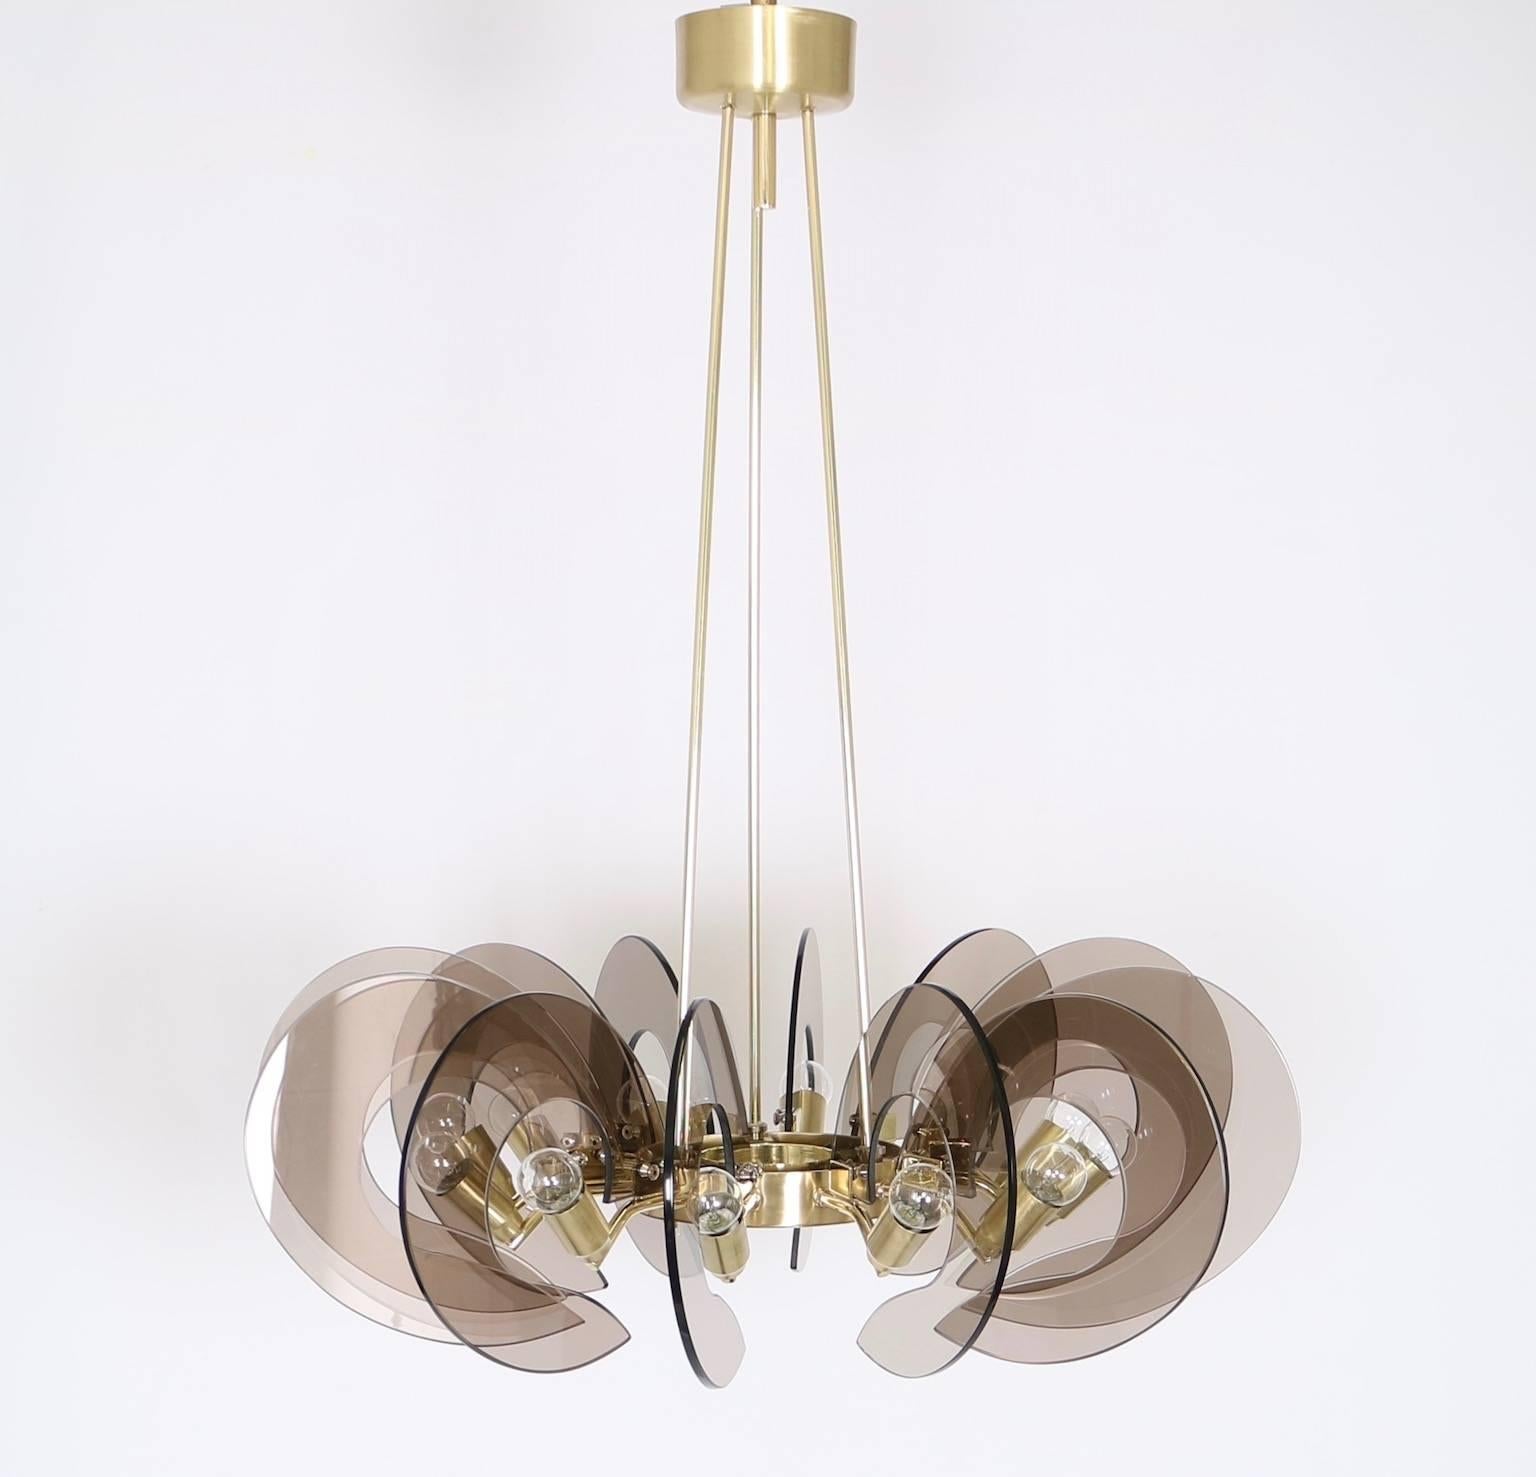 12 light chandelier, attributed to Fontana Arte, manufactured in Italy circa 1950s, brass ring frame with brushed and polished finishes, holding in suspension smoke-tinted glass semi-circle panels. Completely restored and adapted to US standard,